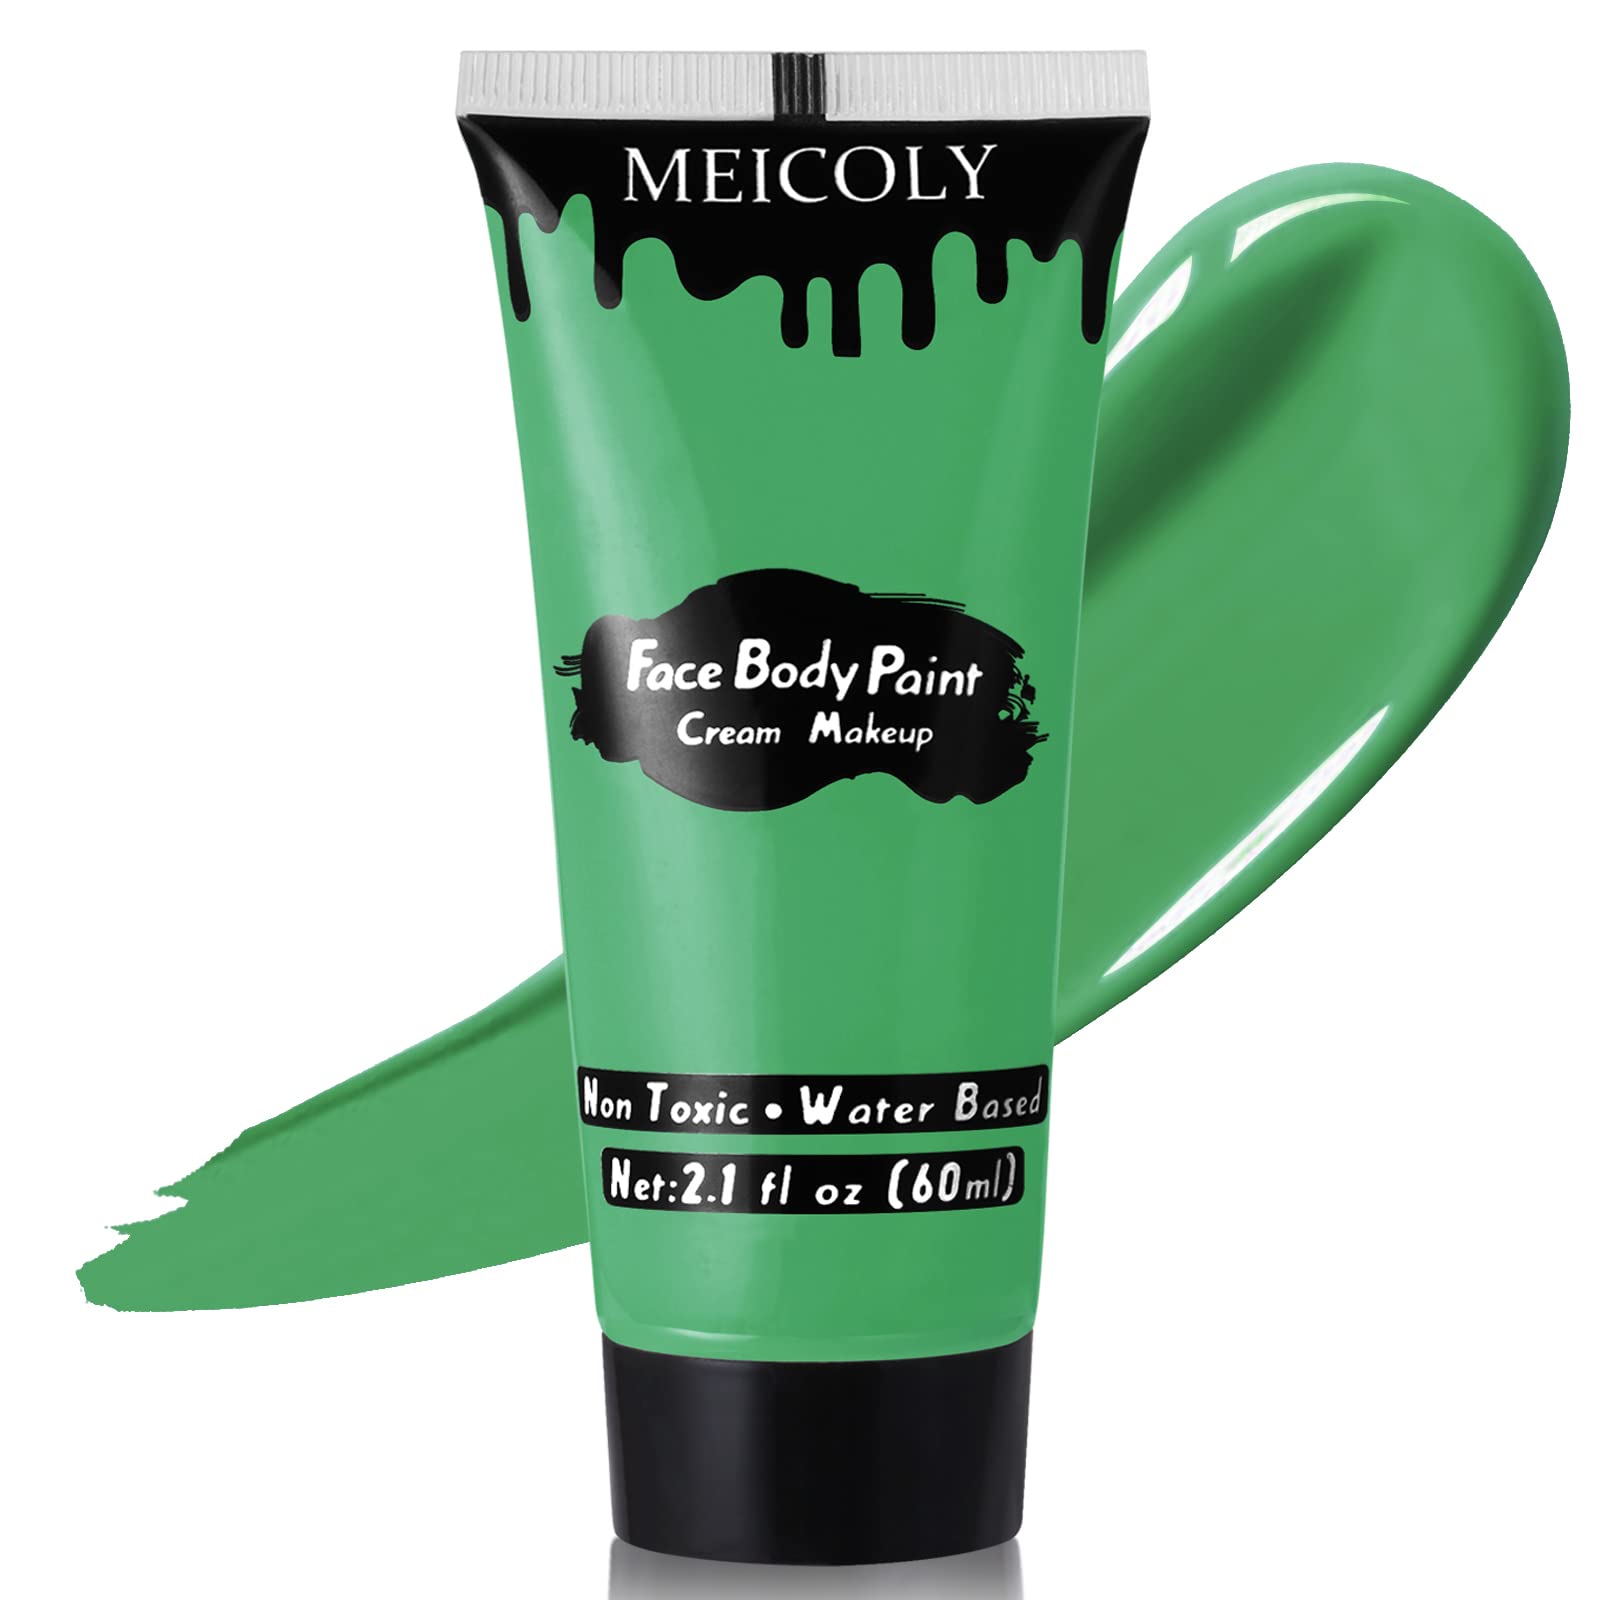  Go Ho 6 Colors Green Face Body Paint,Cream Water Based Makeup  for Adults Children Halloween Cosplay,Body Paint FX Makeup  Palette,Professional Grinch Face Paint Green Makeup : Beauty & Personal Care